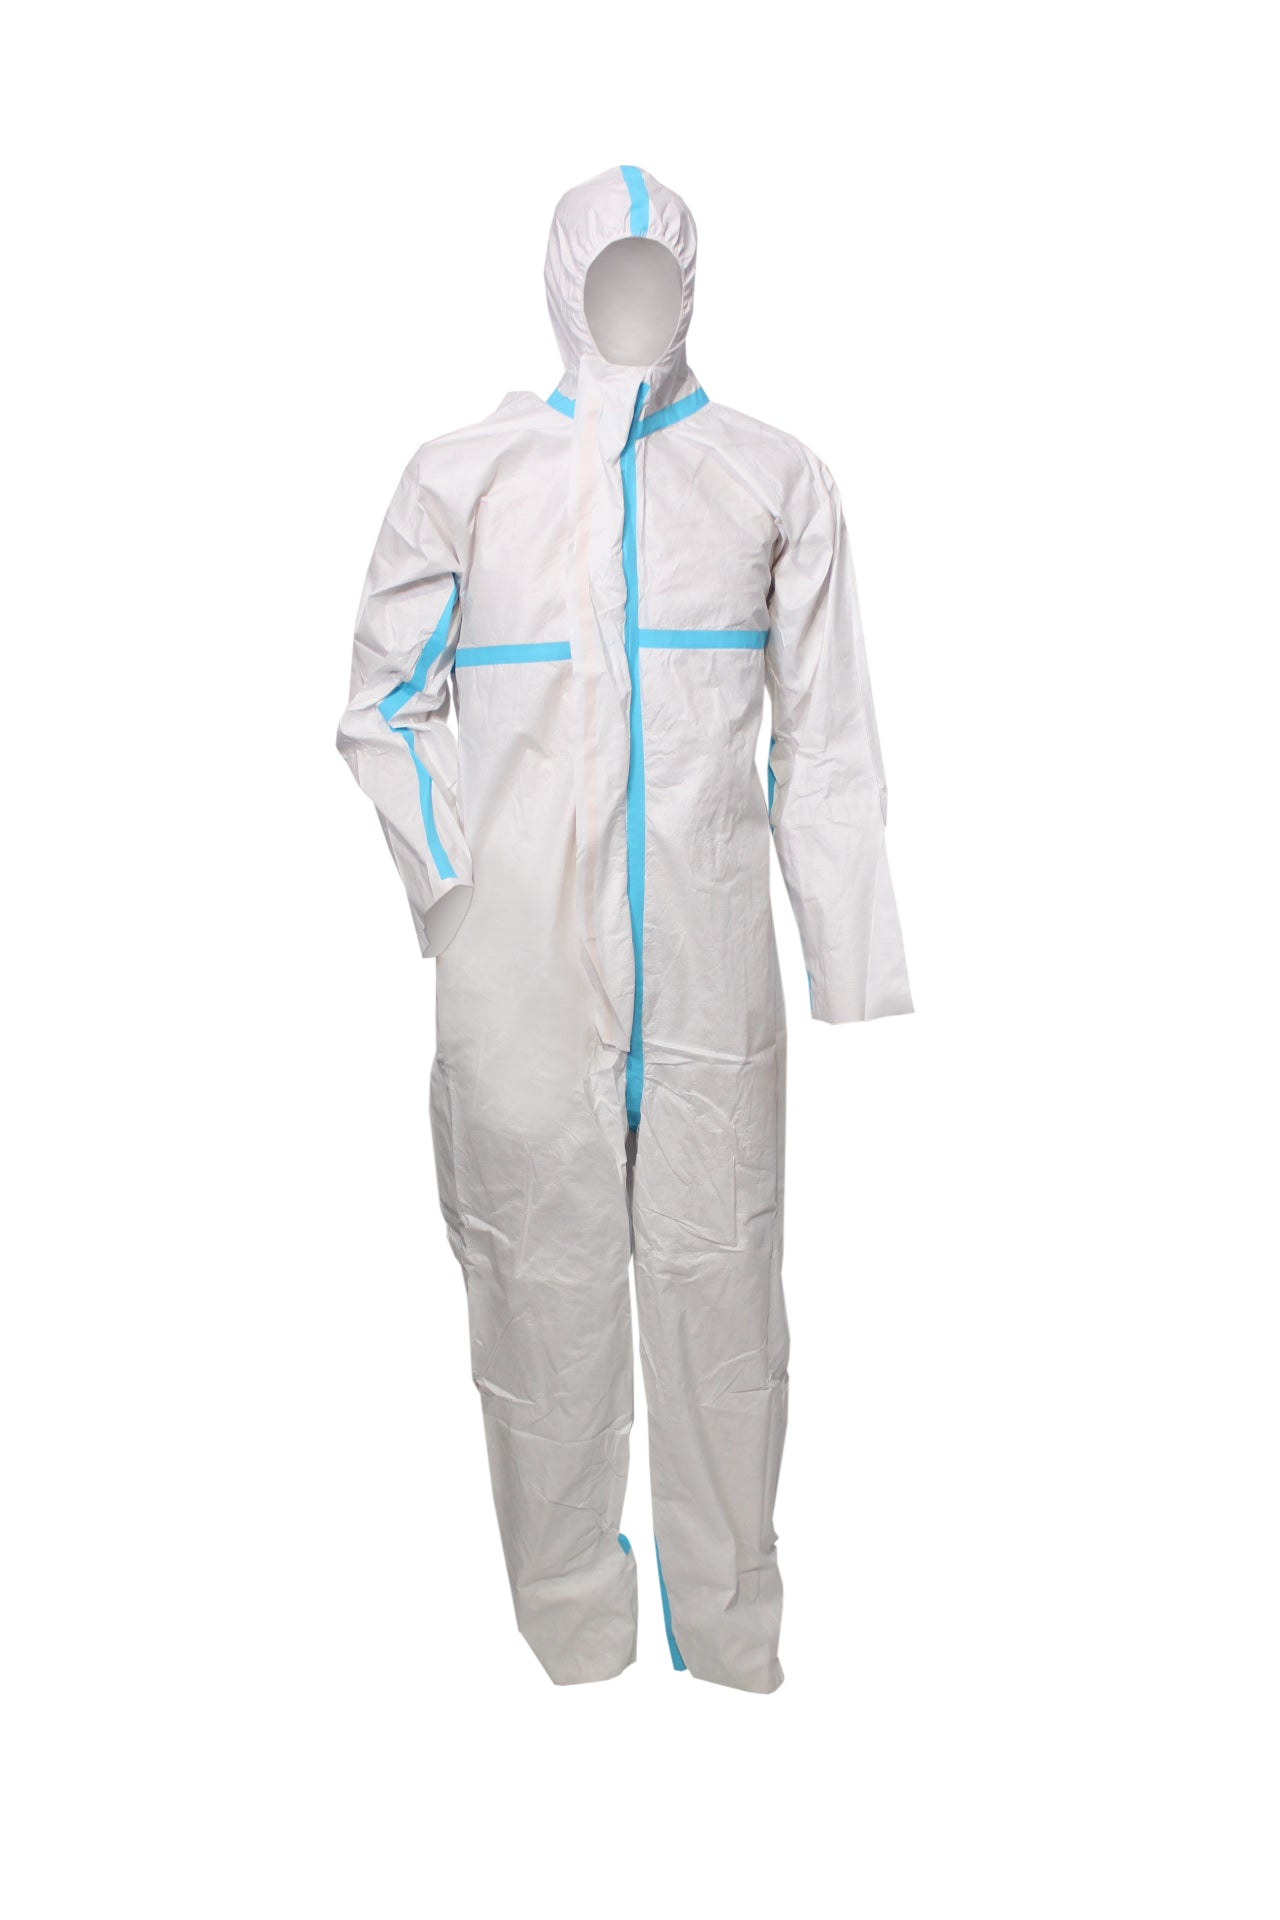 Type 5/6 Medical Coveralls